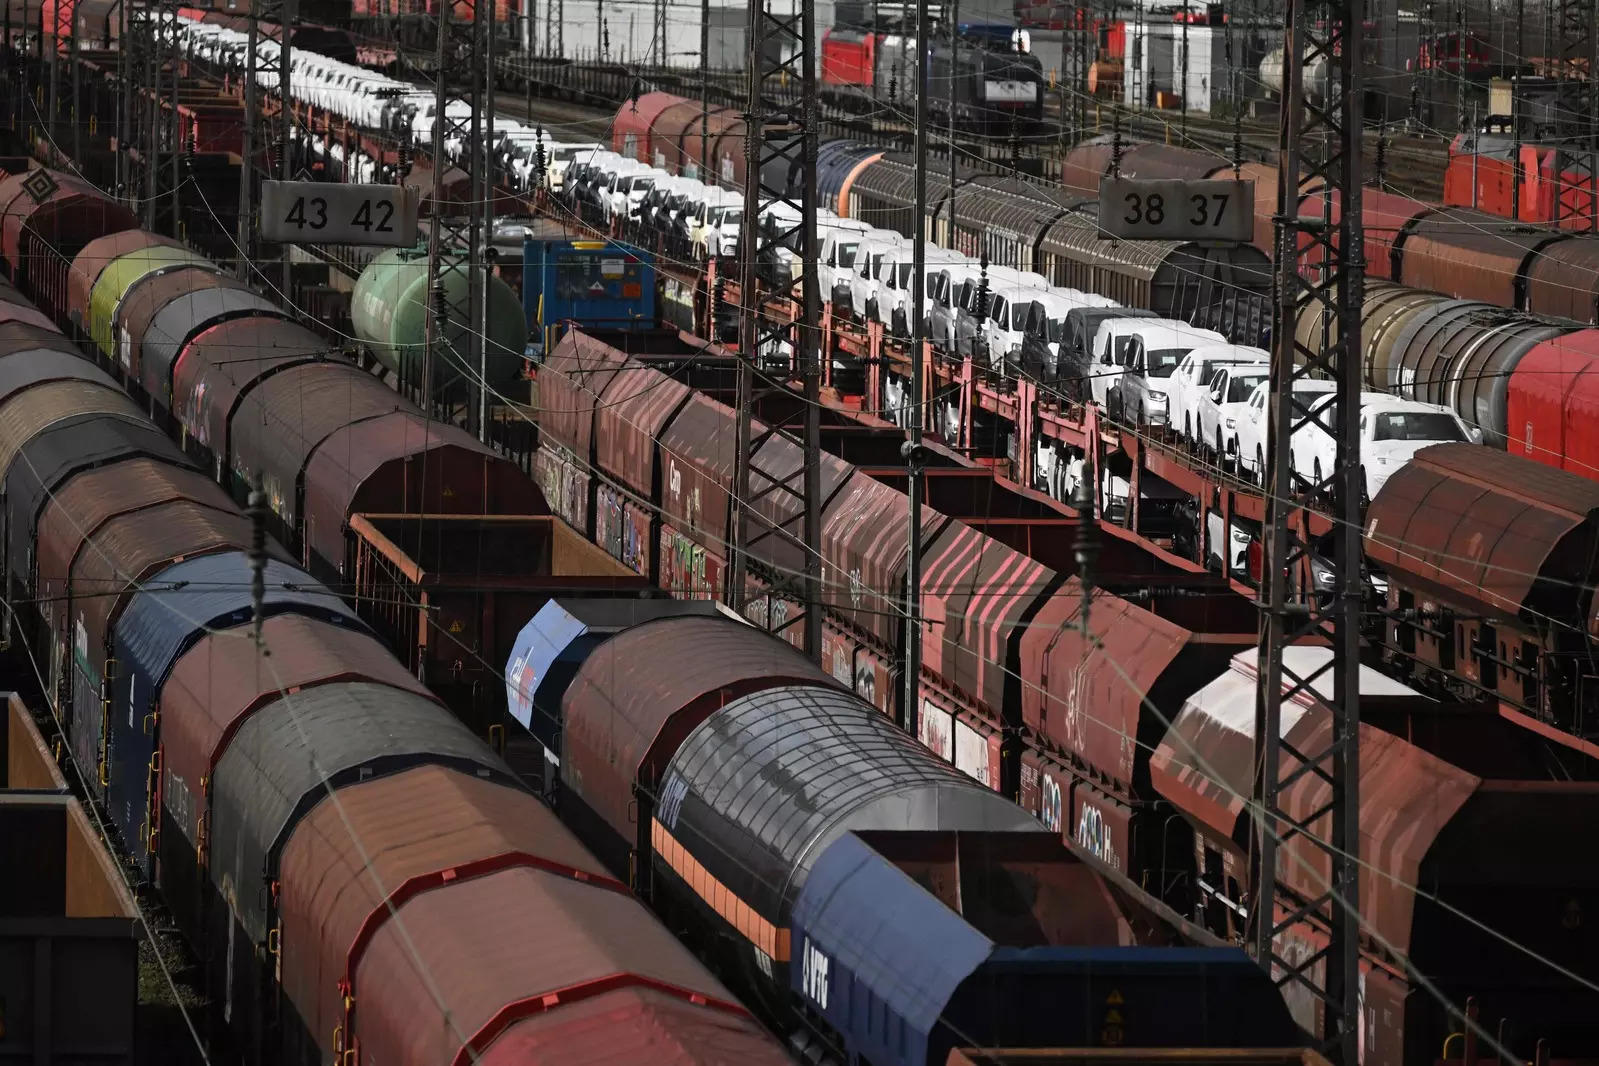 CAG raises safety concerns over 3.3 lakh wagons being operated without NCO approval